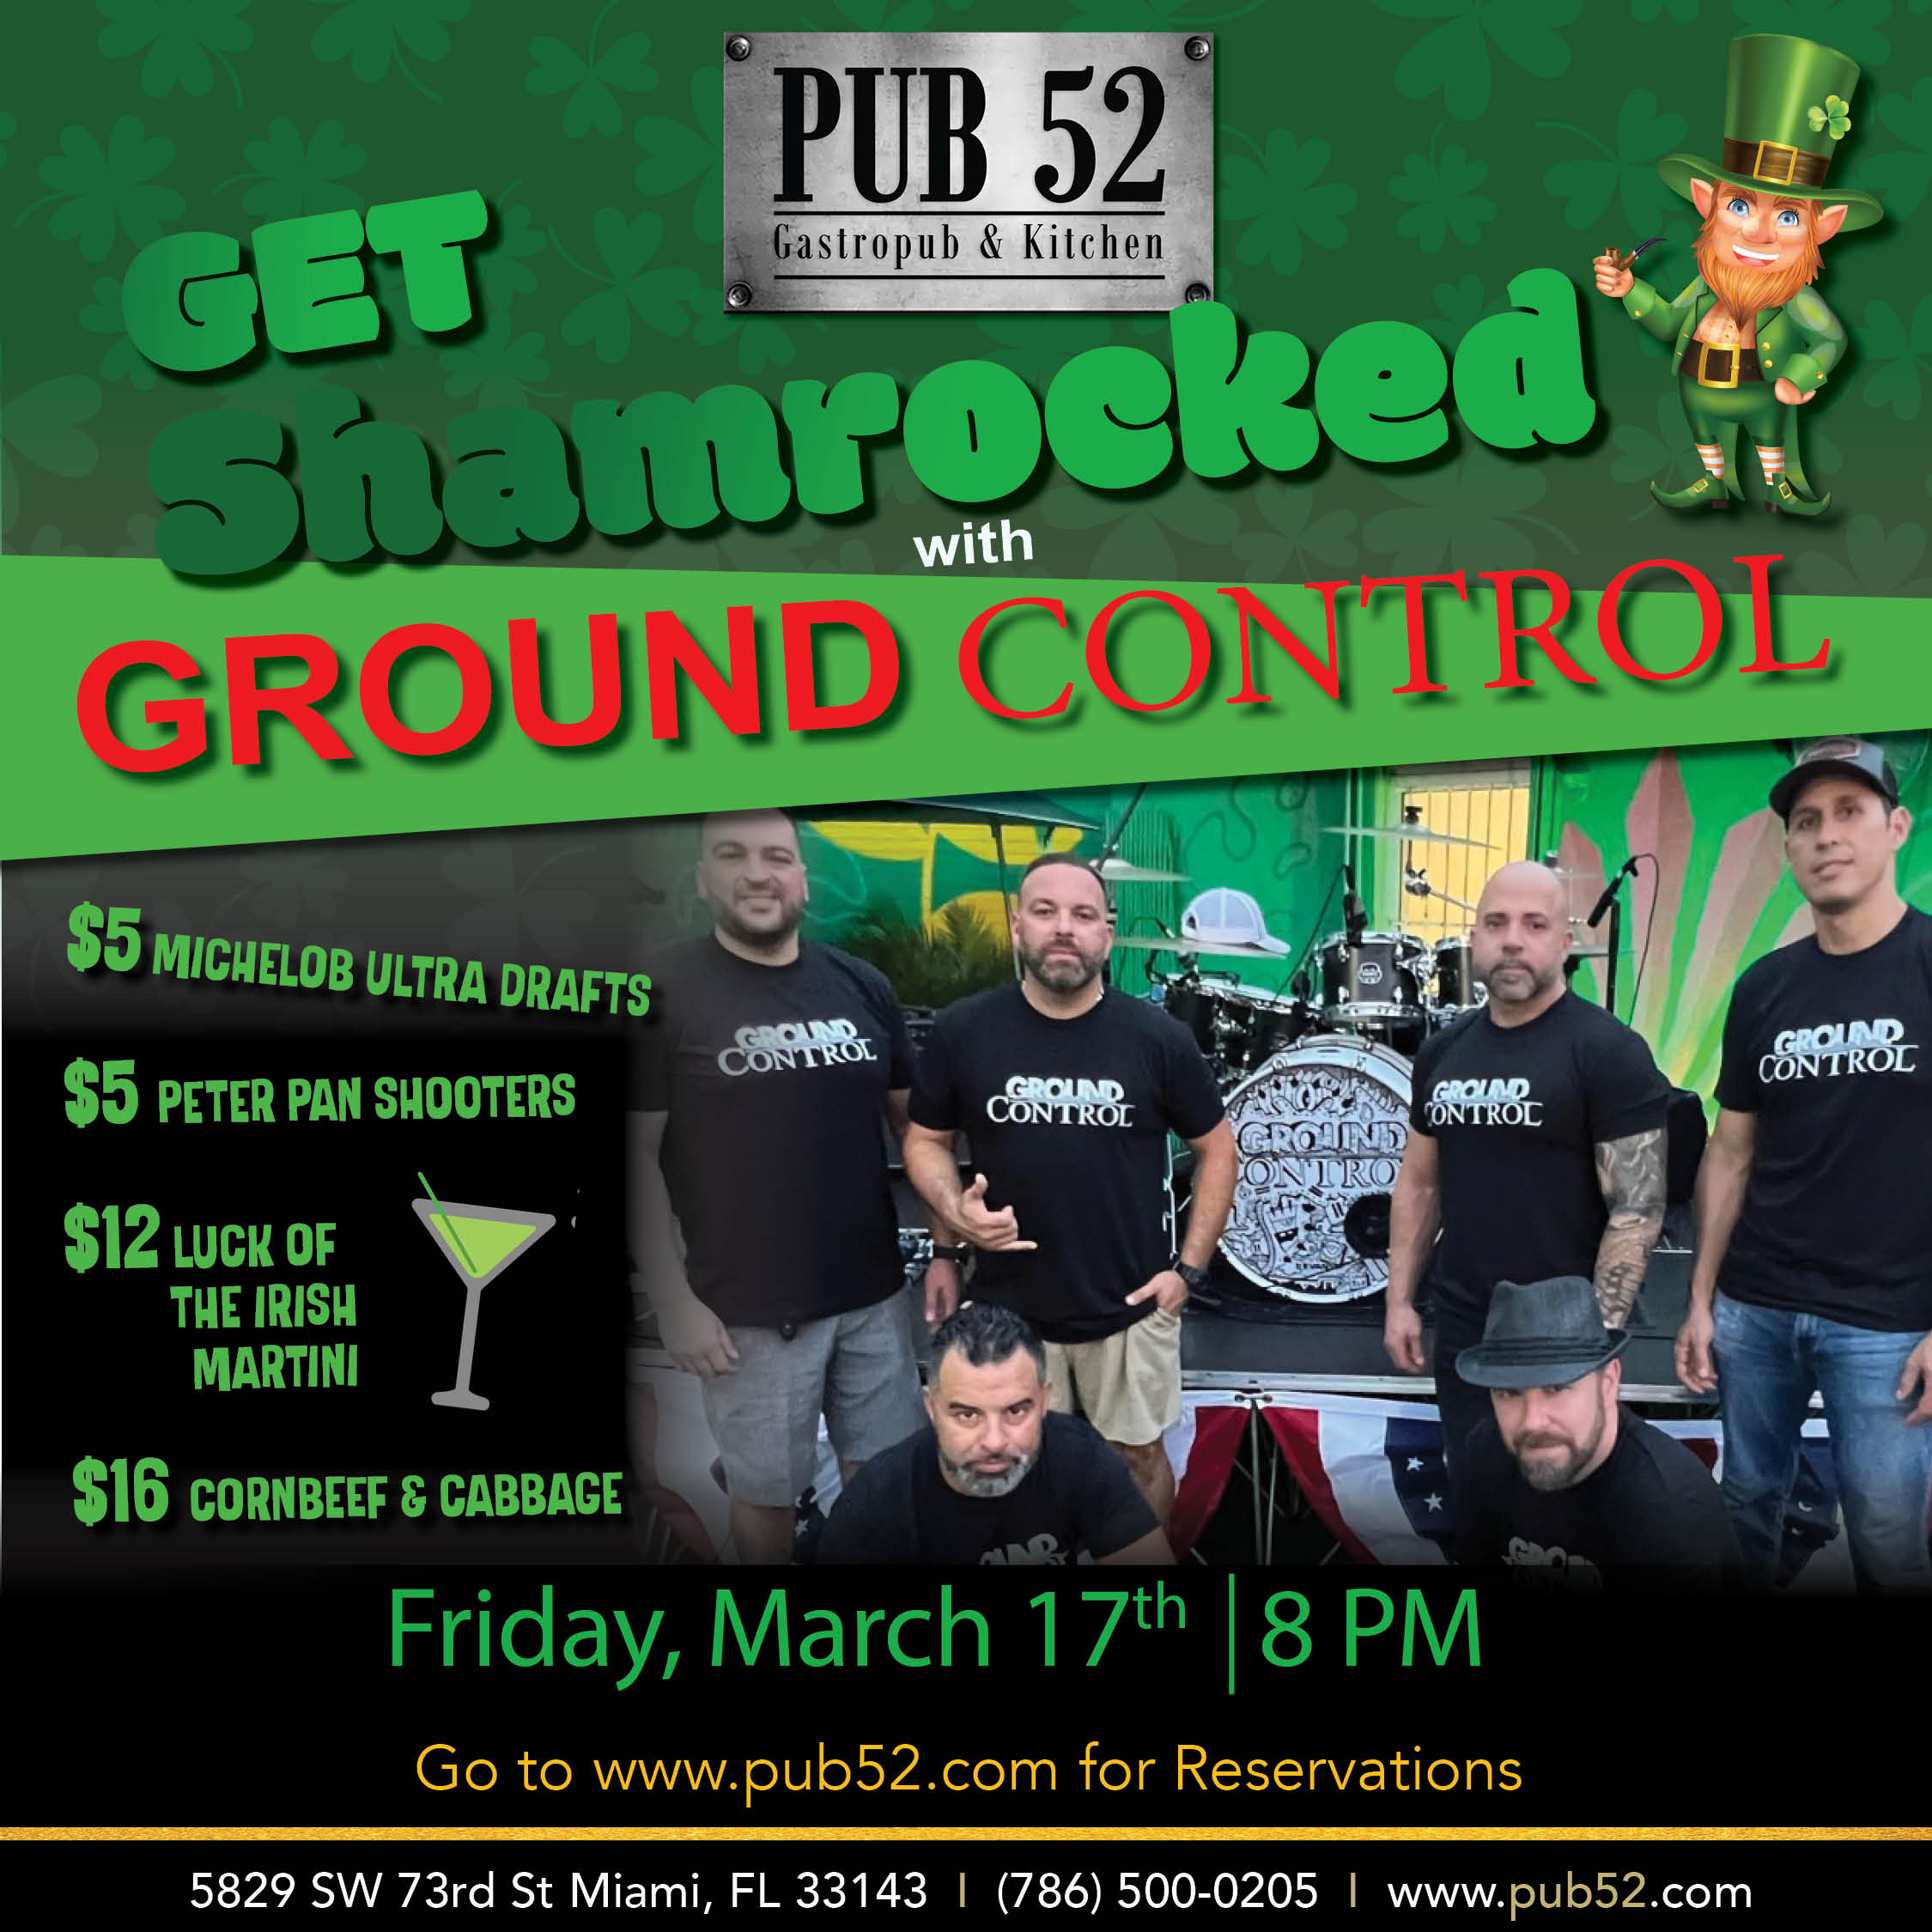 Get Shamrocked with Ground Control